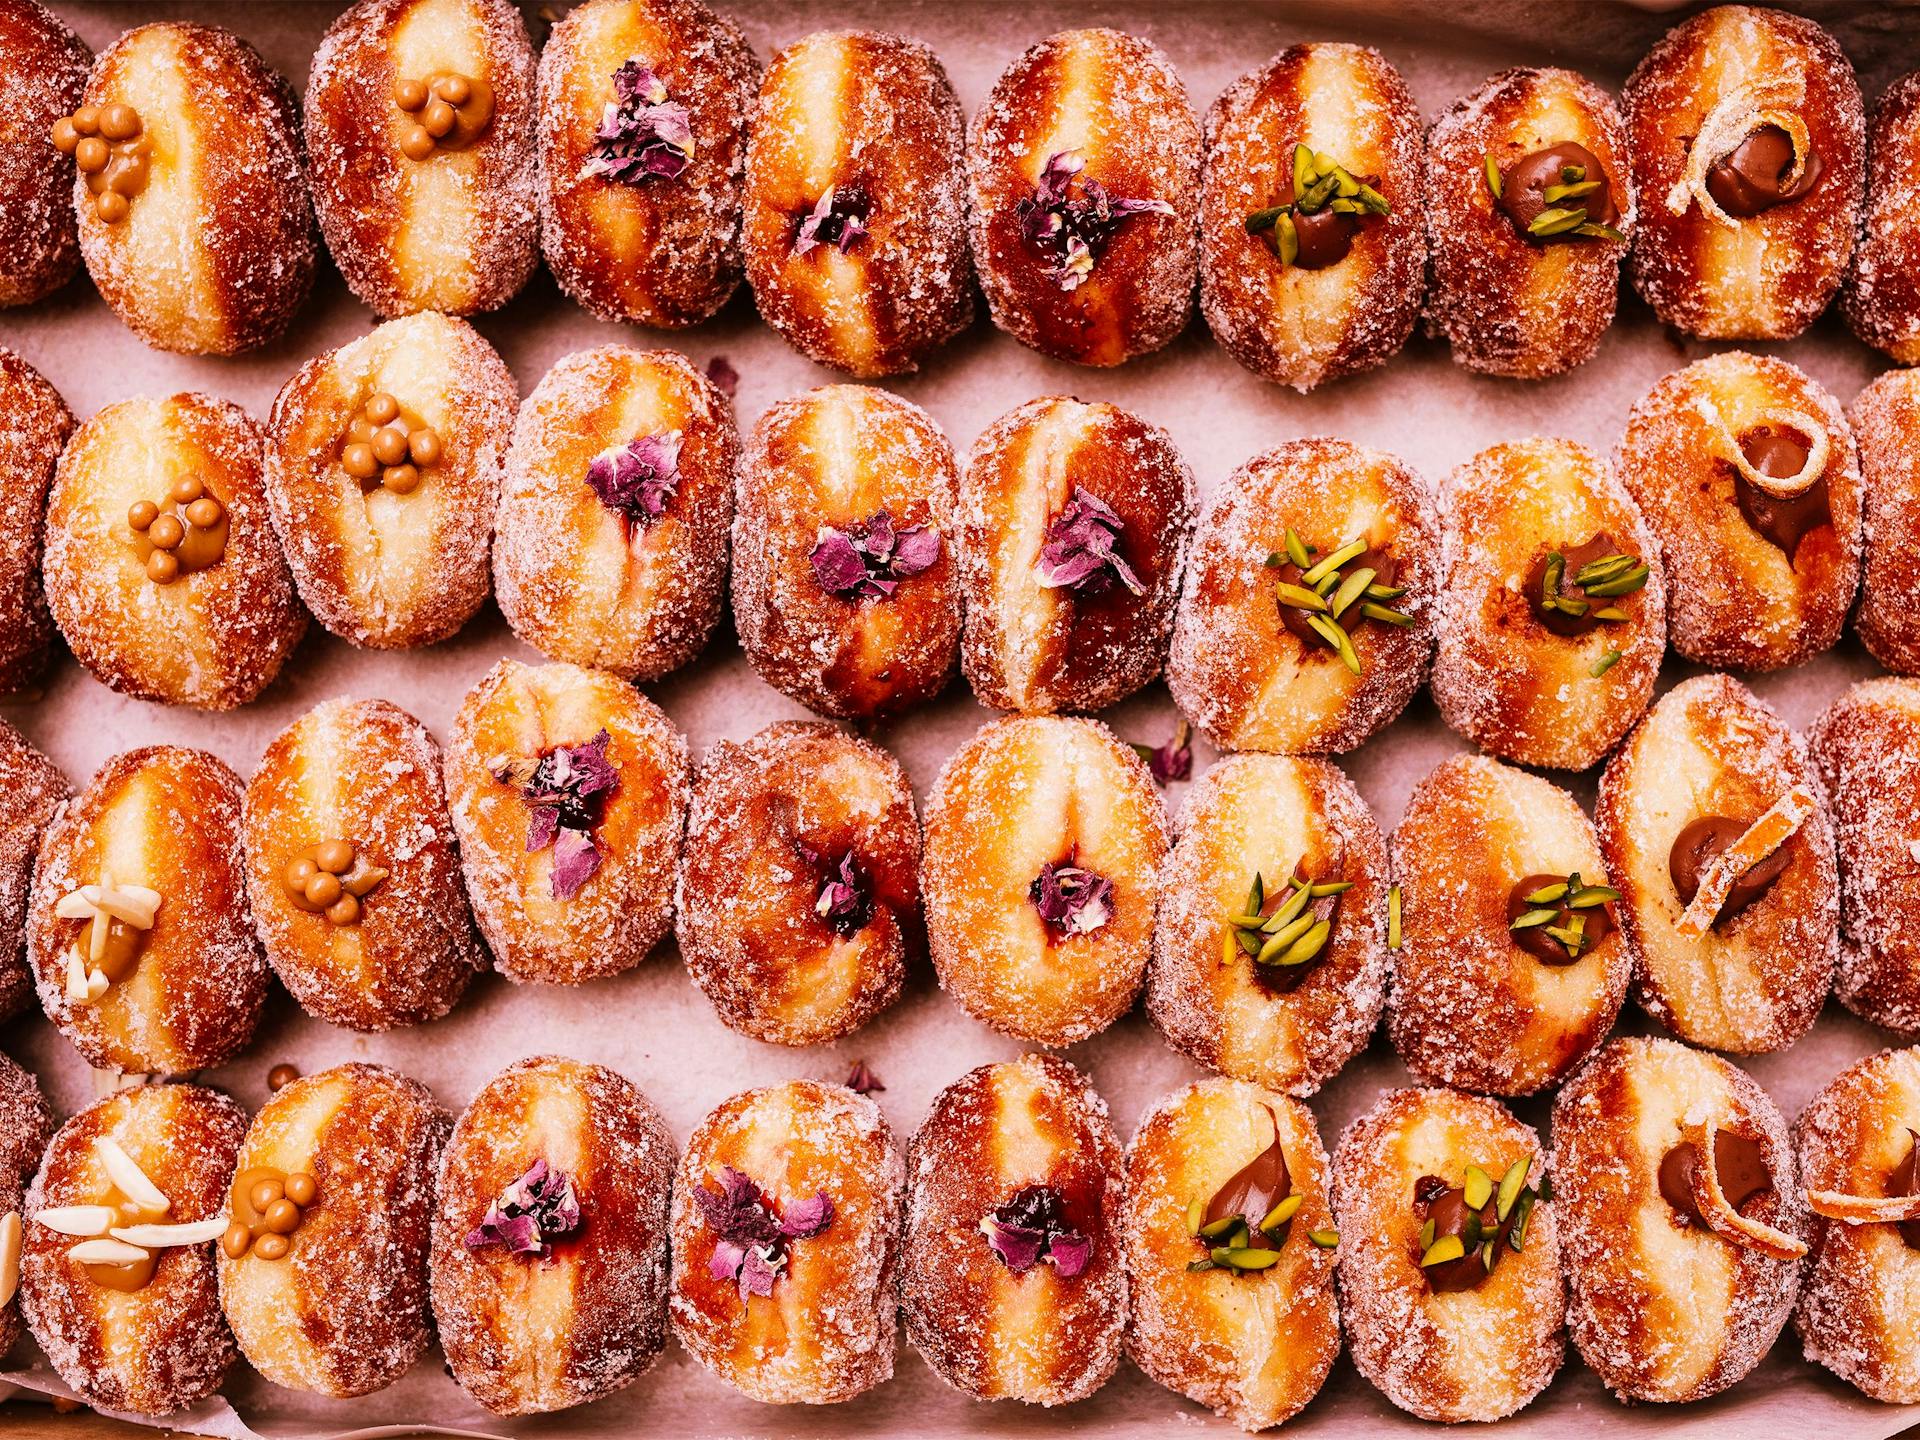 Dozens of donuts lie face up with jam and other fillings on display 